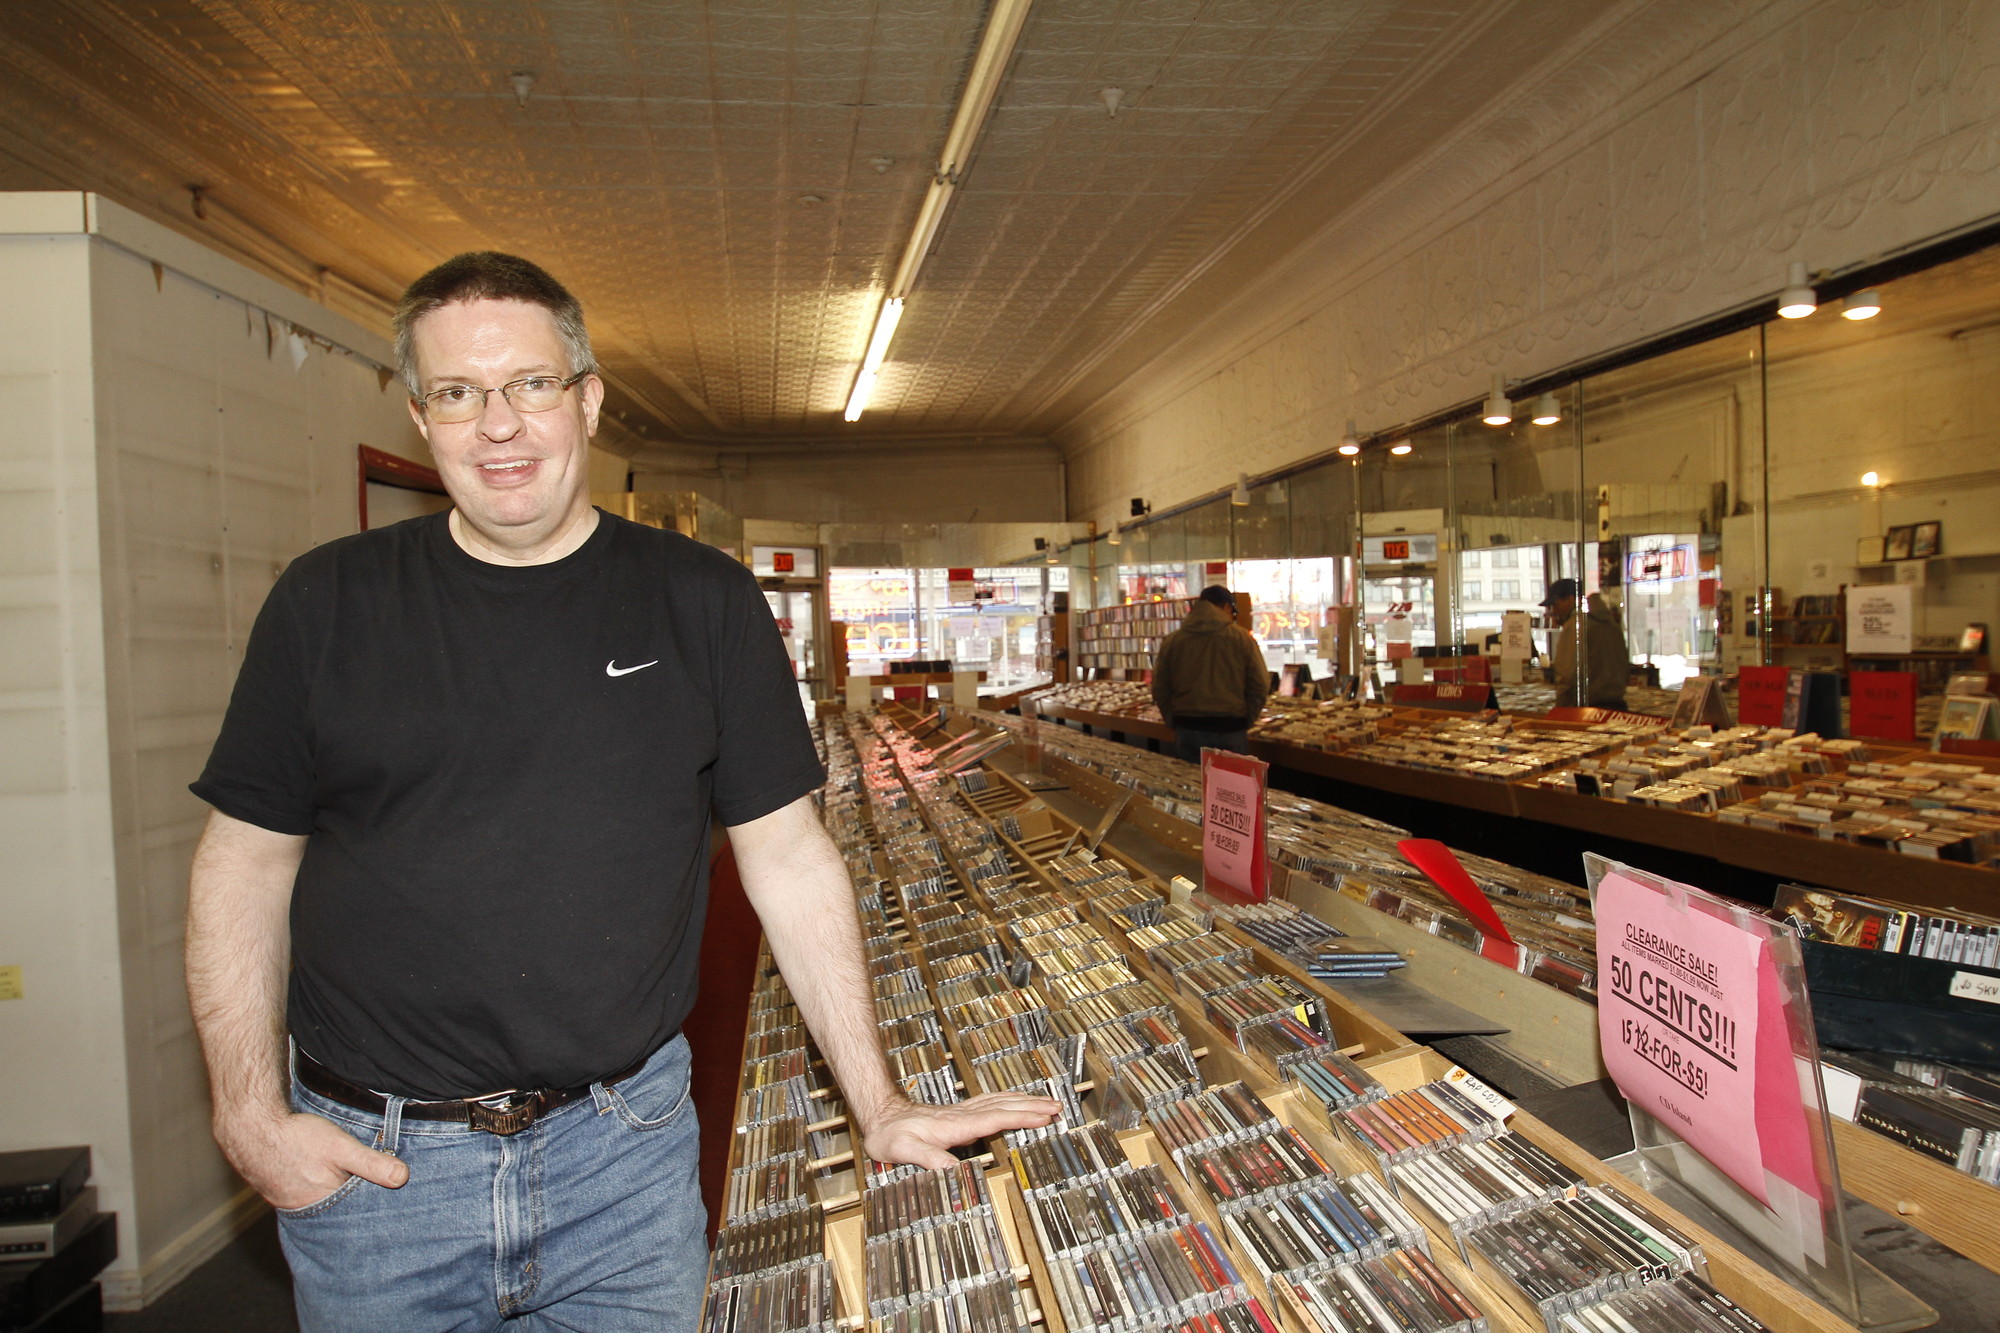 Doug Mashkow has owned CD Island for 18 years, but changes in the industry are forcing him to close at the end of the month.